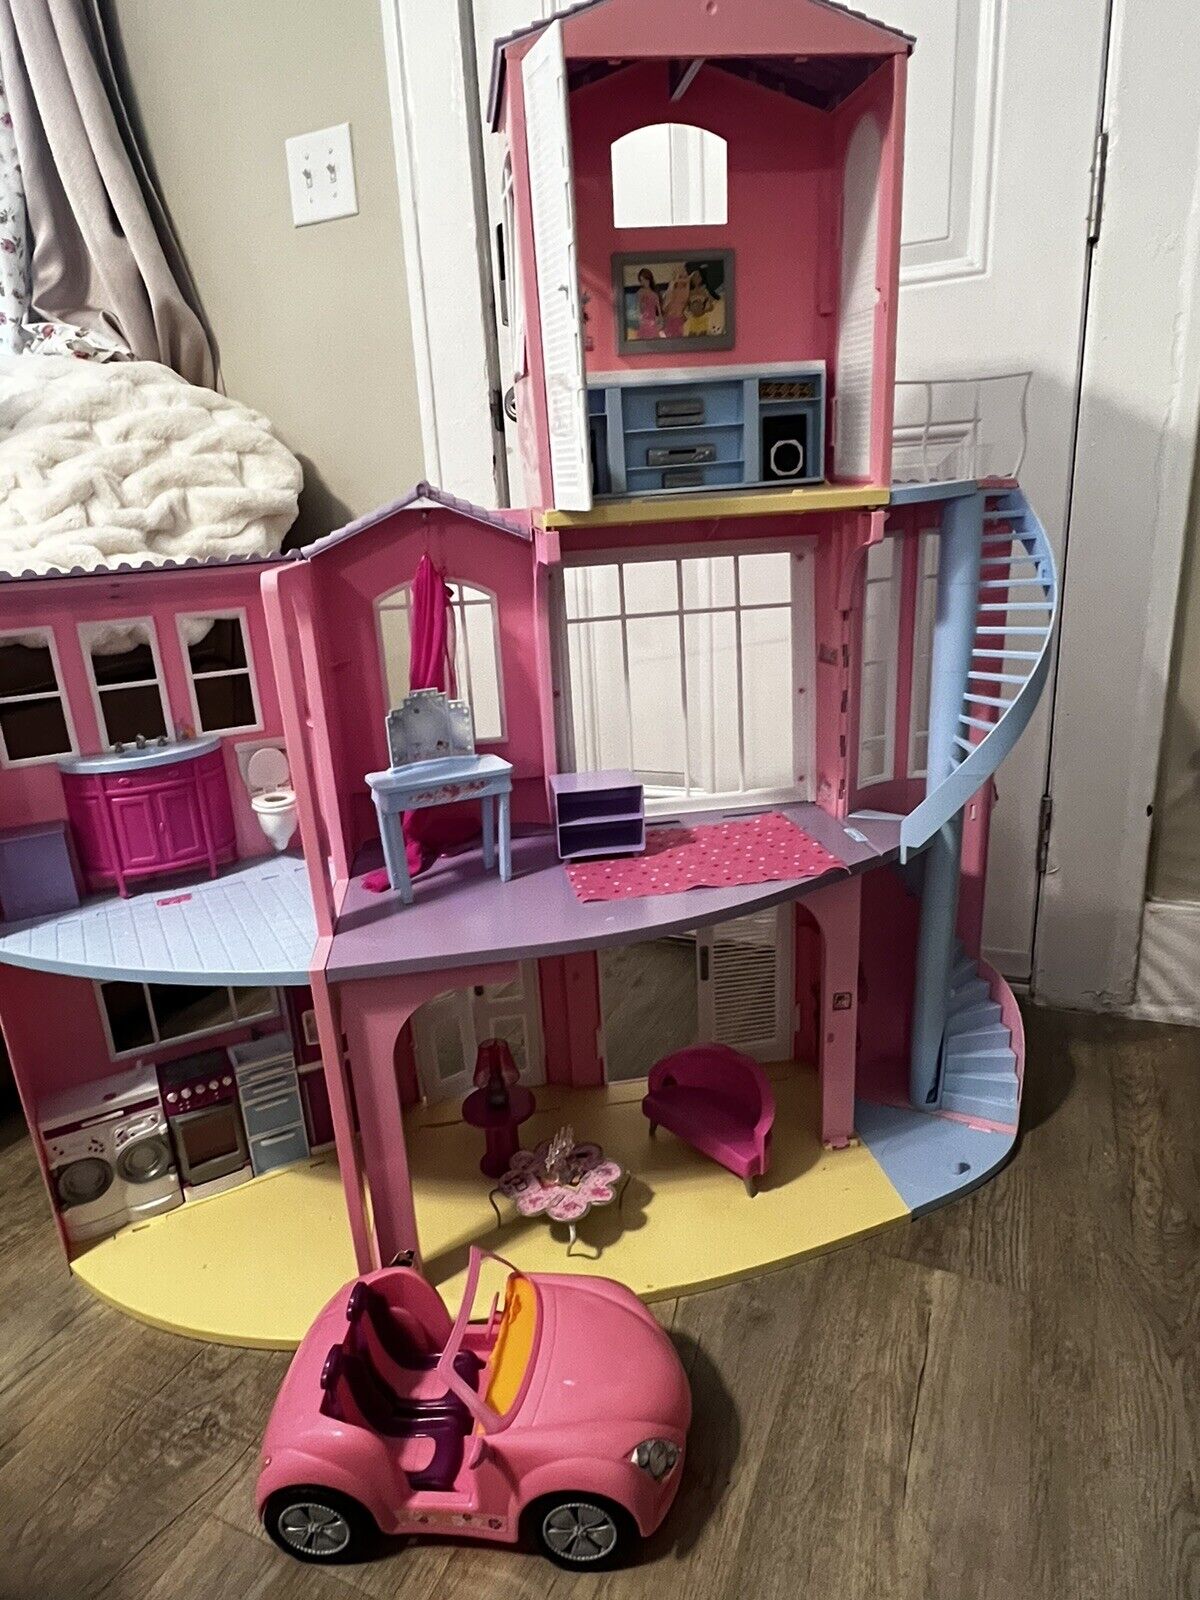 HUGE 2006 Mattel Barbie 3 Story Dream House With Working Sounds & Some Furniture